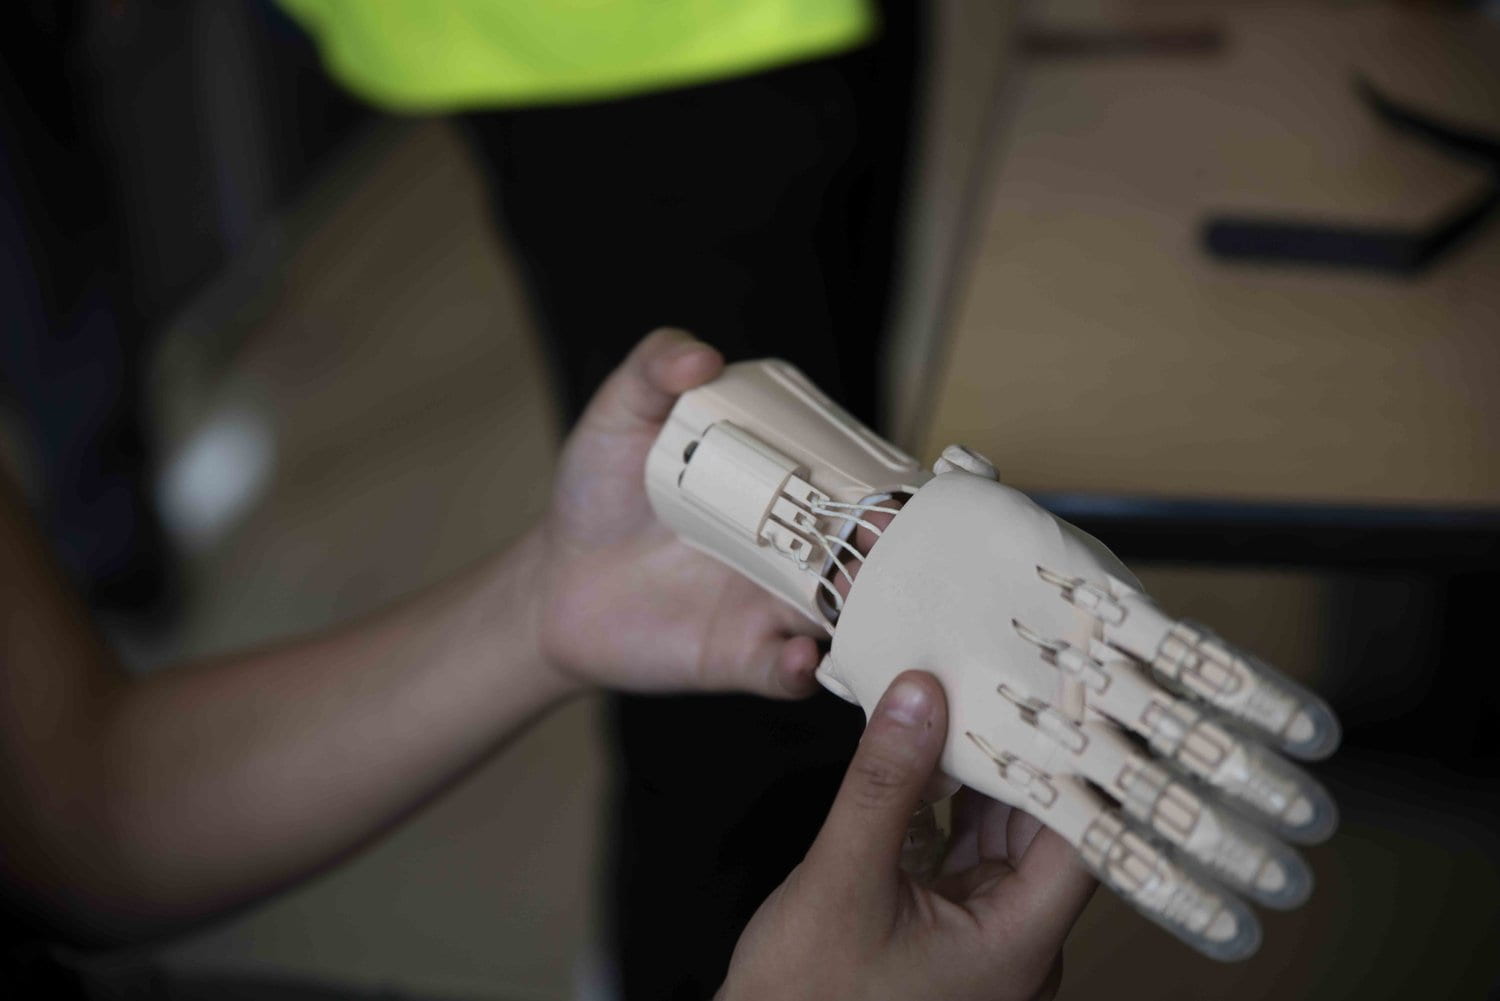 High school robotics students from Cleveland used a 3D printer to create this prosthetic hand.